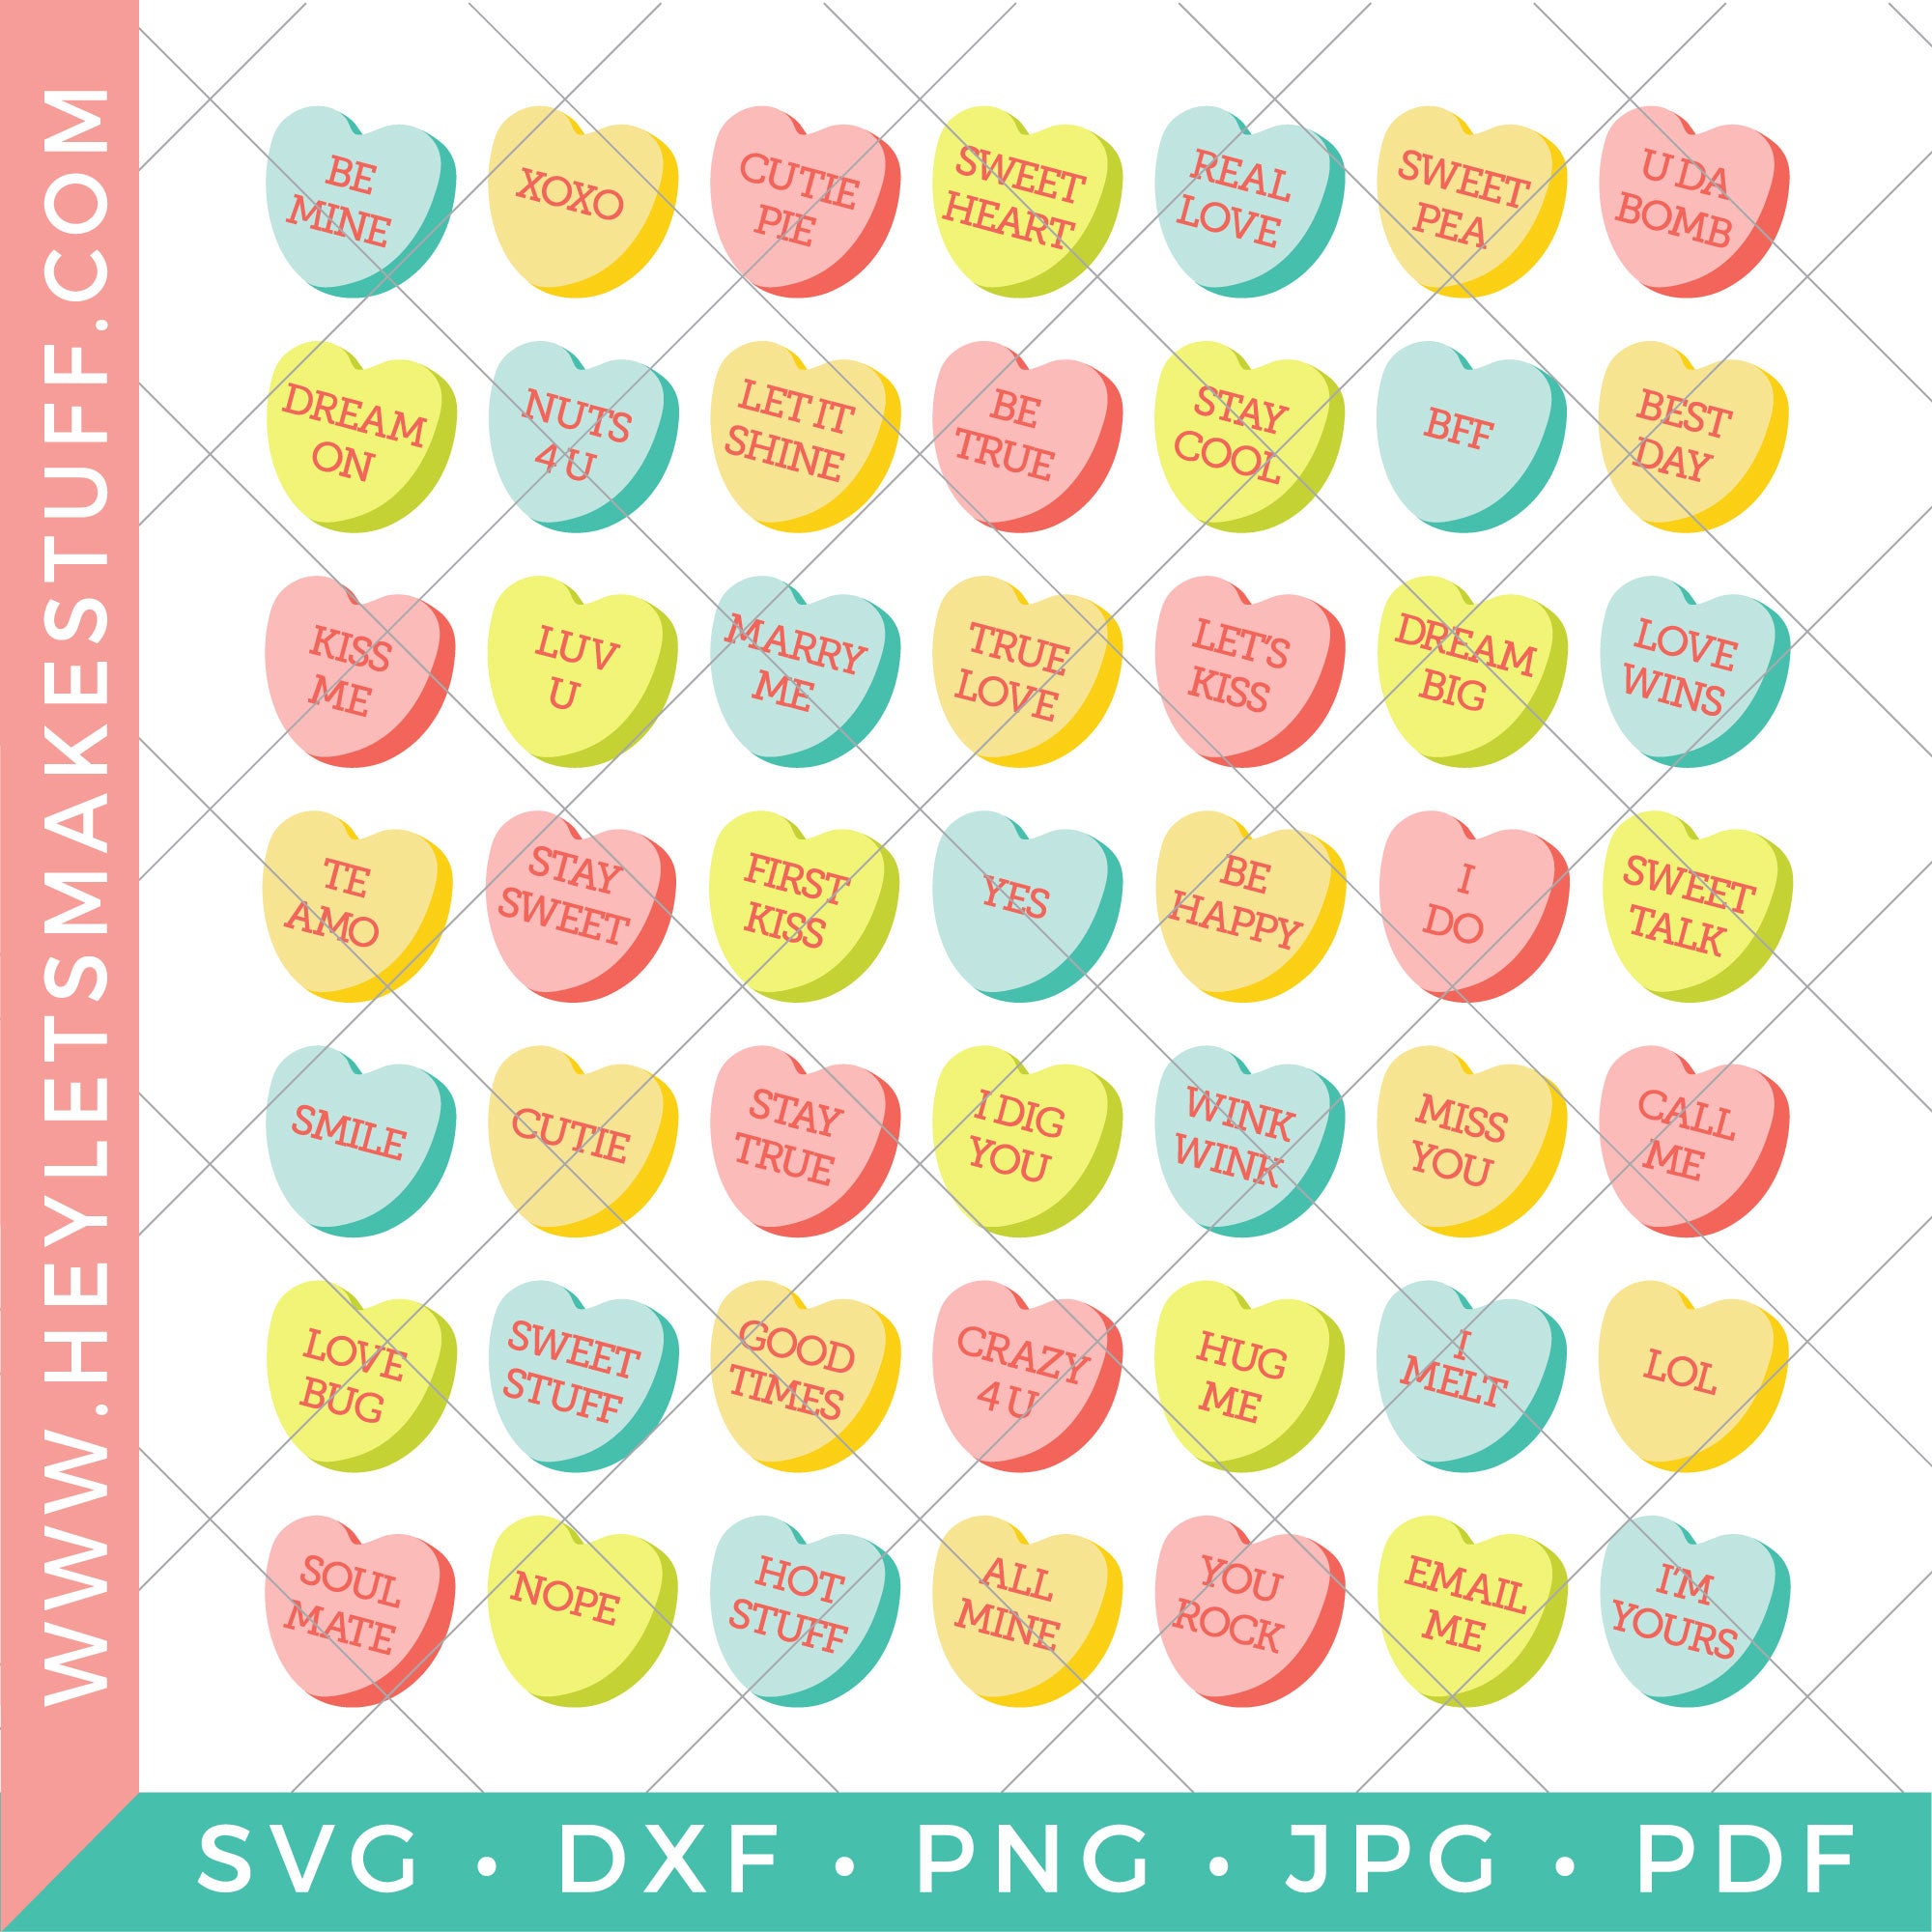 Heart Clipart, Heart Candy Clip Art, Sweethearts Candy Clipart,  Conversation Hearts Clipart Commercial & Personal BUY 2 GET 1 FREE 